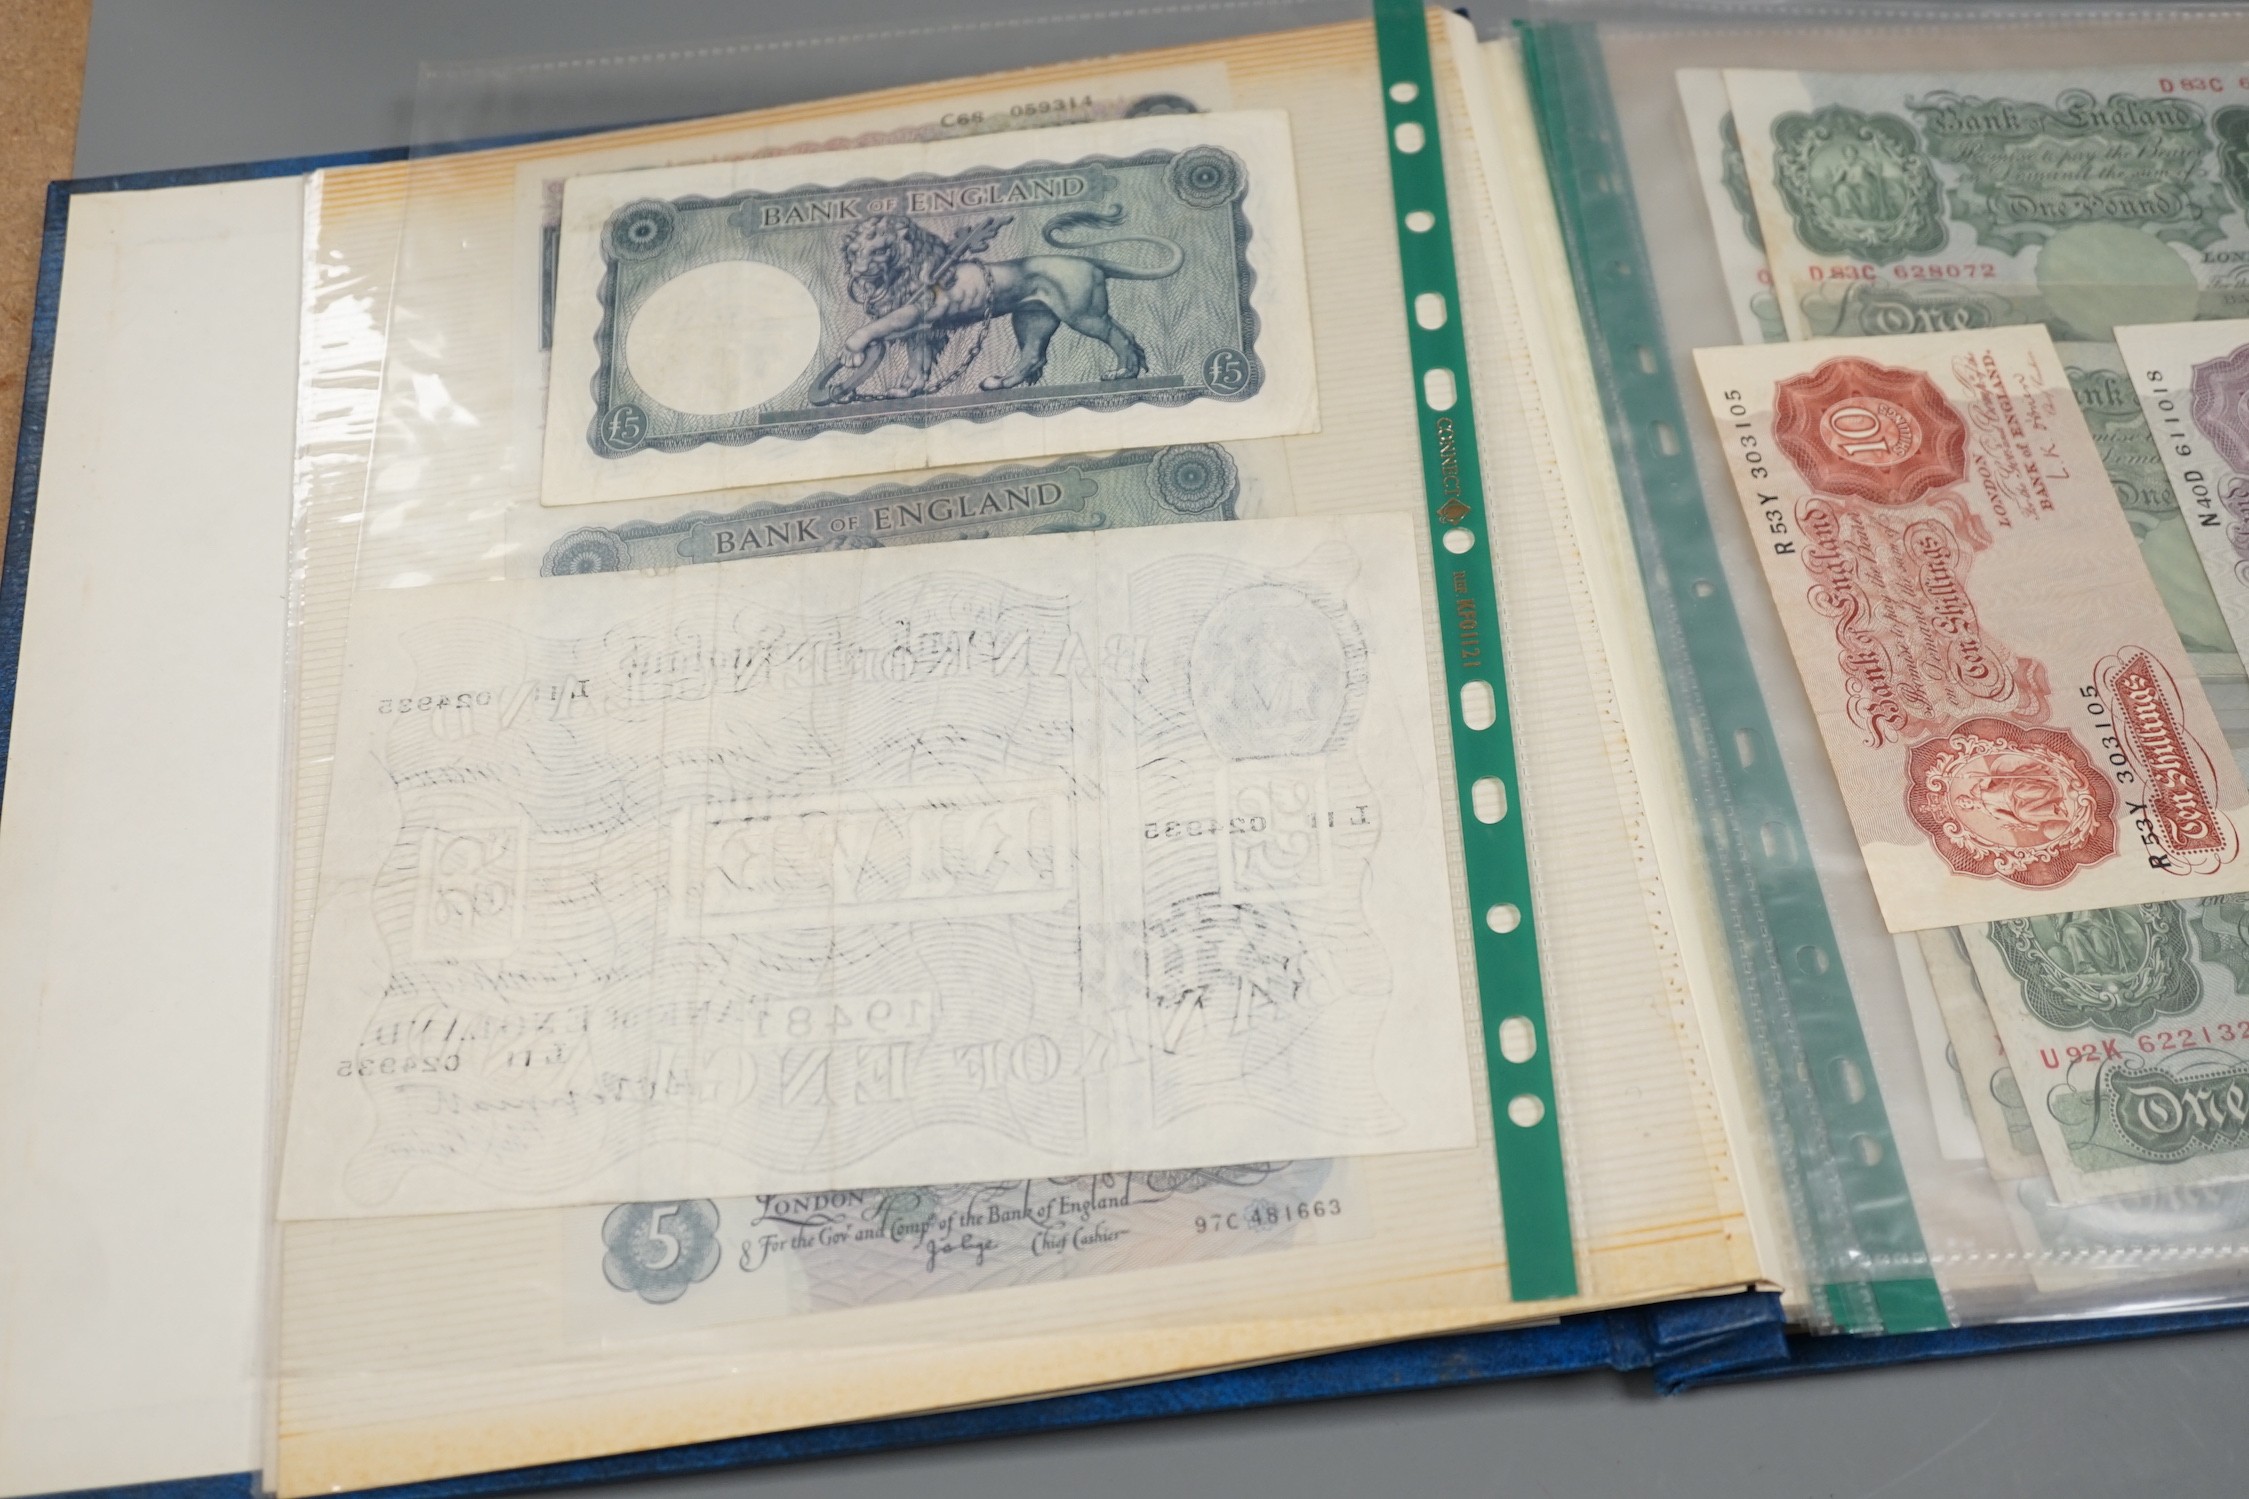 A Weald of Kent One Pound banknote, April 1813 and a portfolio of early banknotes including the white Five Pounds note, 1947, Chief Cashier Kenneth Peppiatt